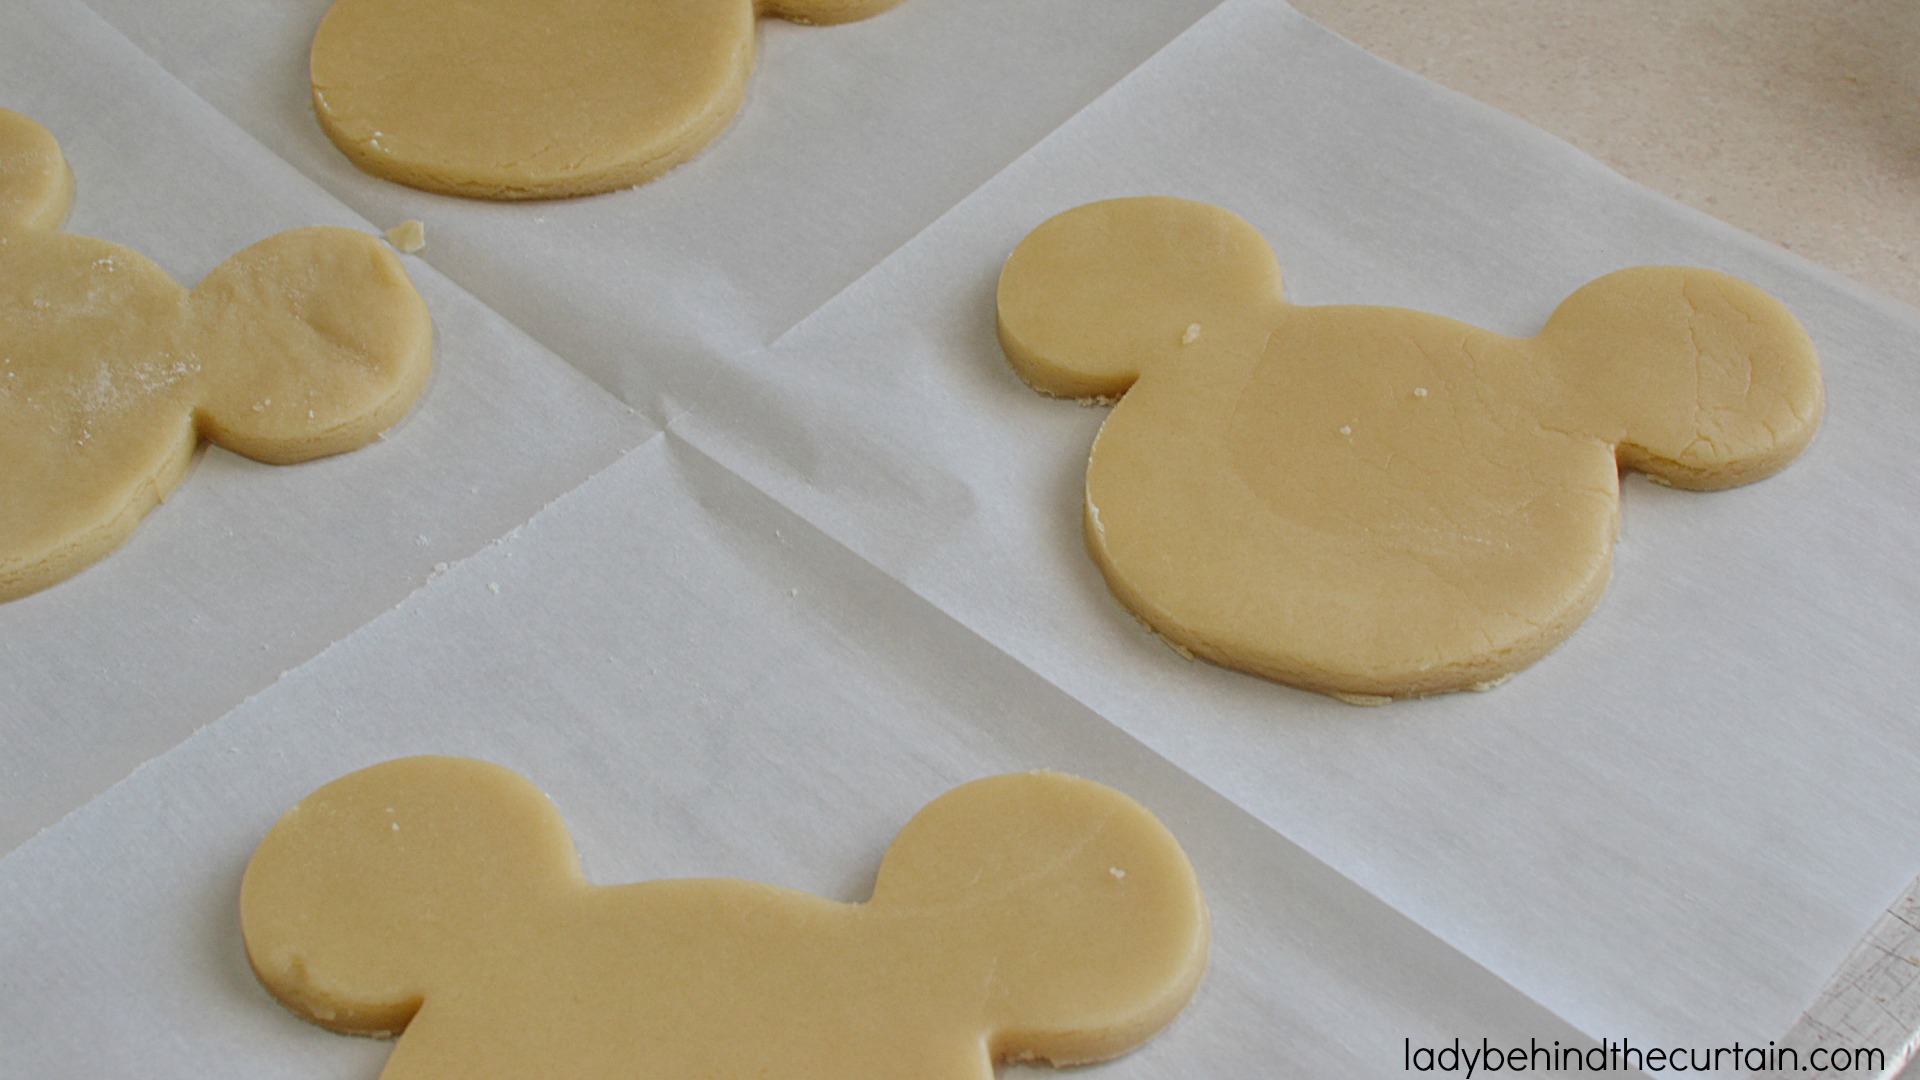 Classic Sugar Cookie Recipe | This tender cookie is everyone's favorite. With a wonderful butter flavor and just the right amount of sugar. You can cut this dough into a variety of shapes to compliment any occasion.